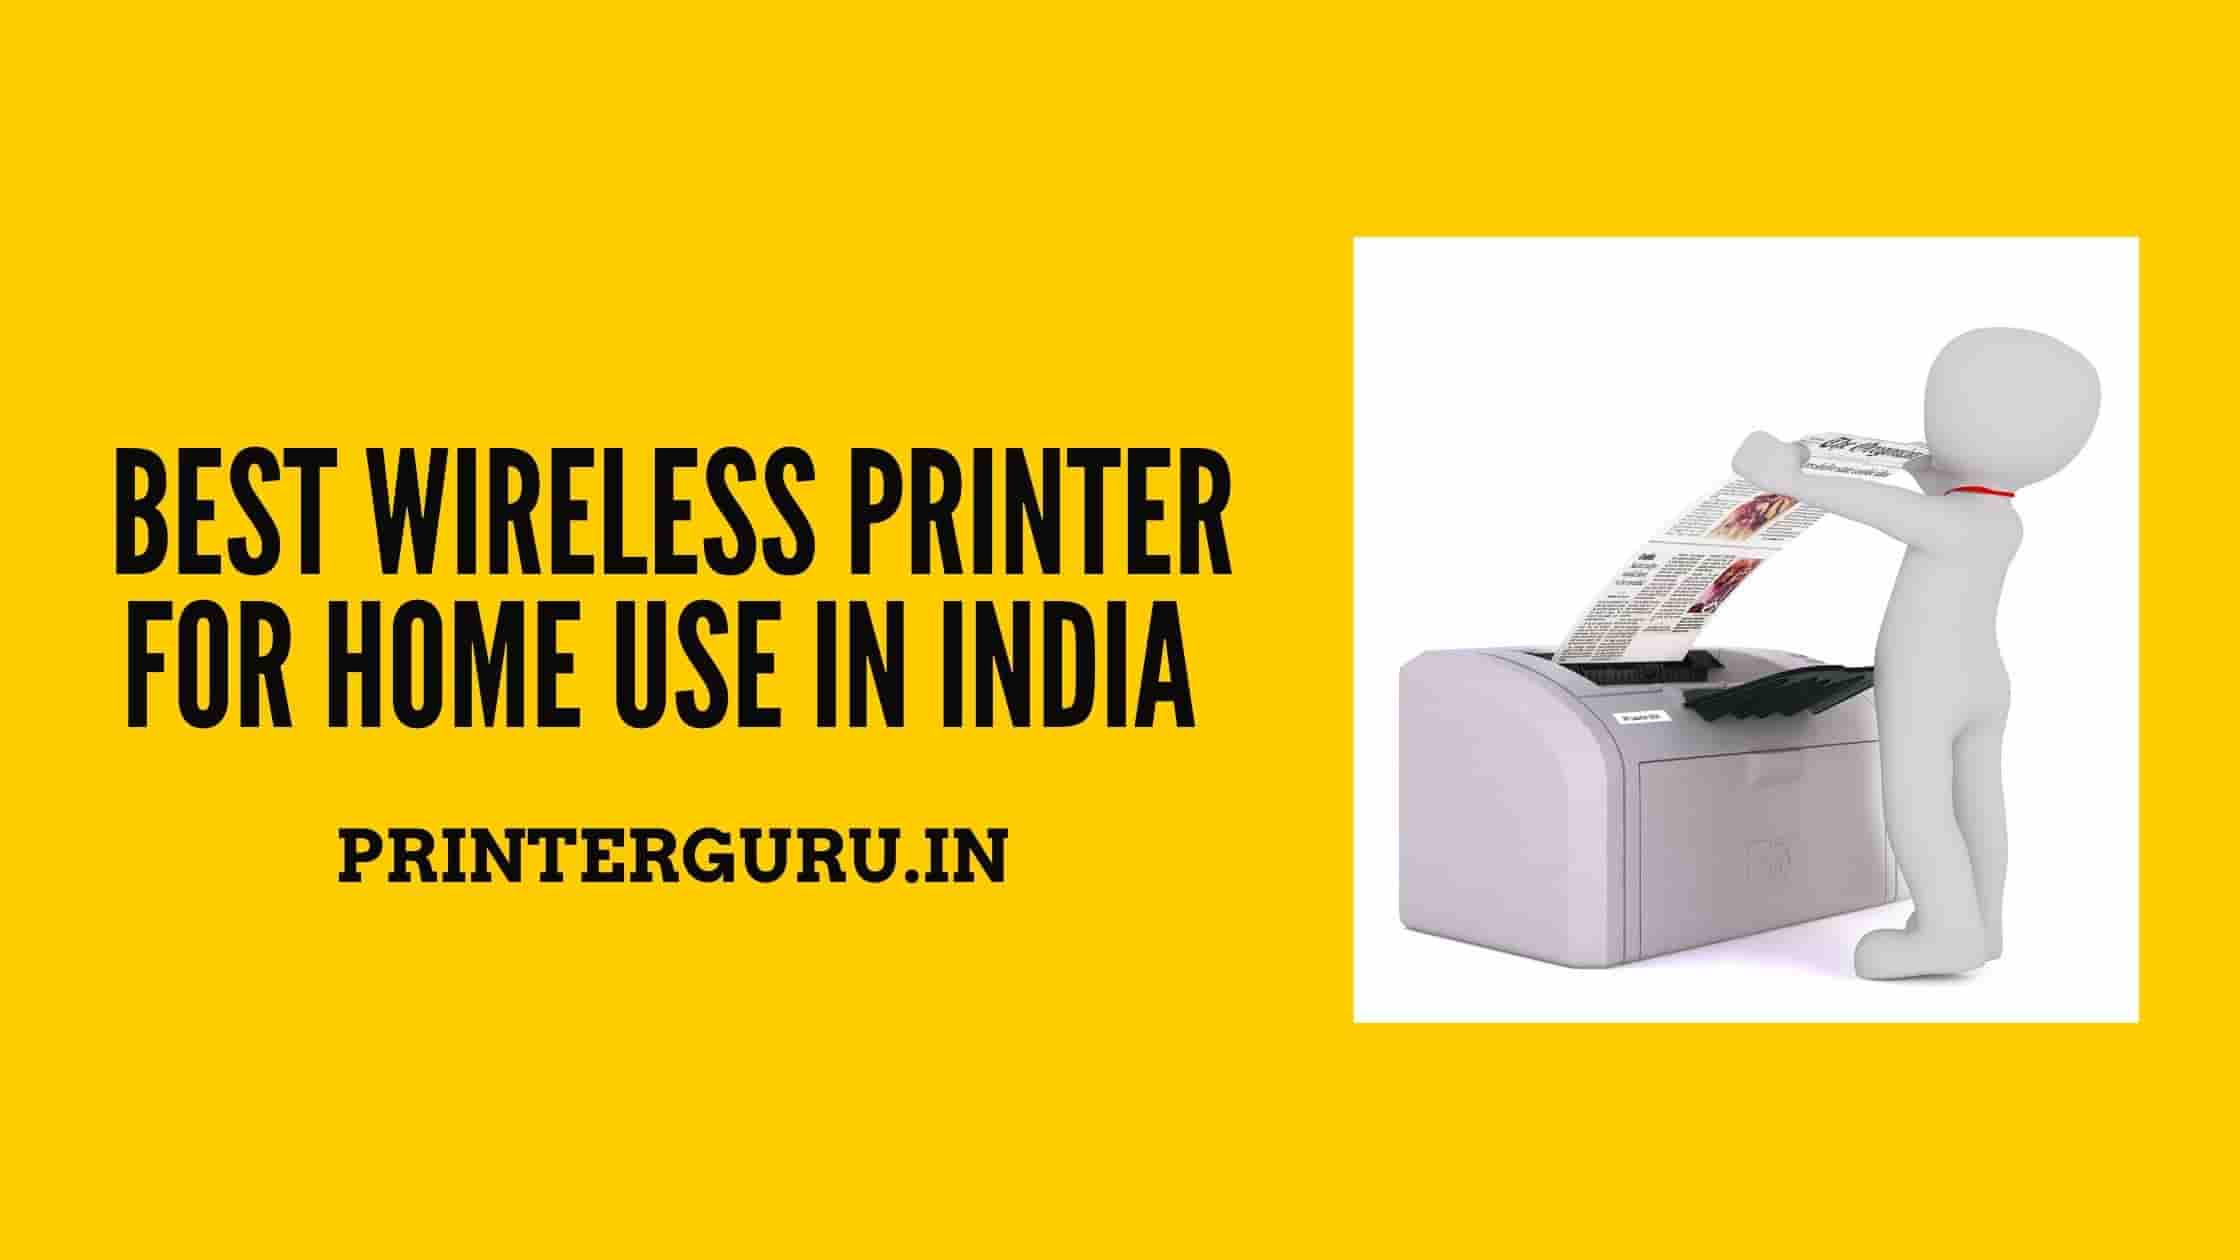 Best Wireless Printer for Home Use in India